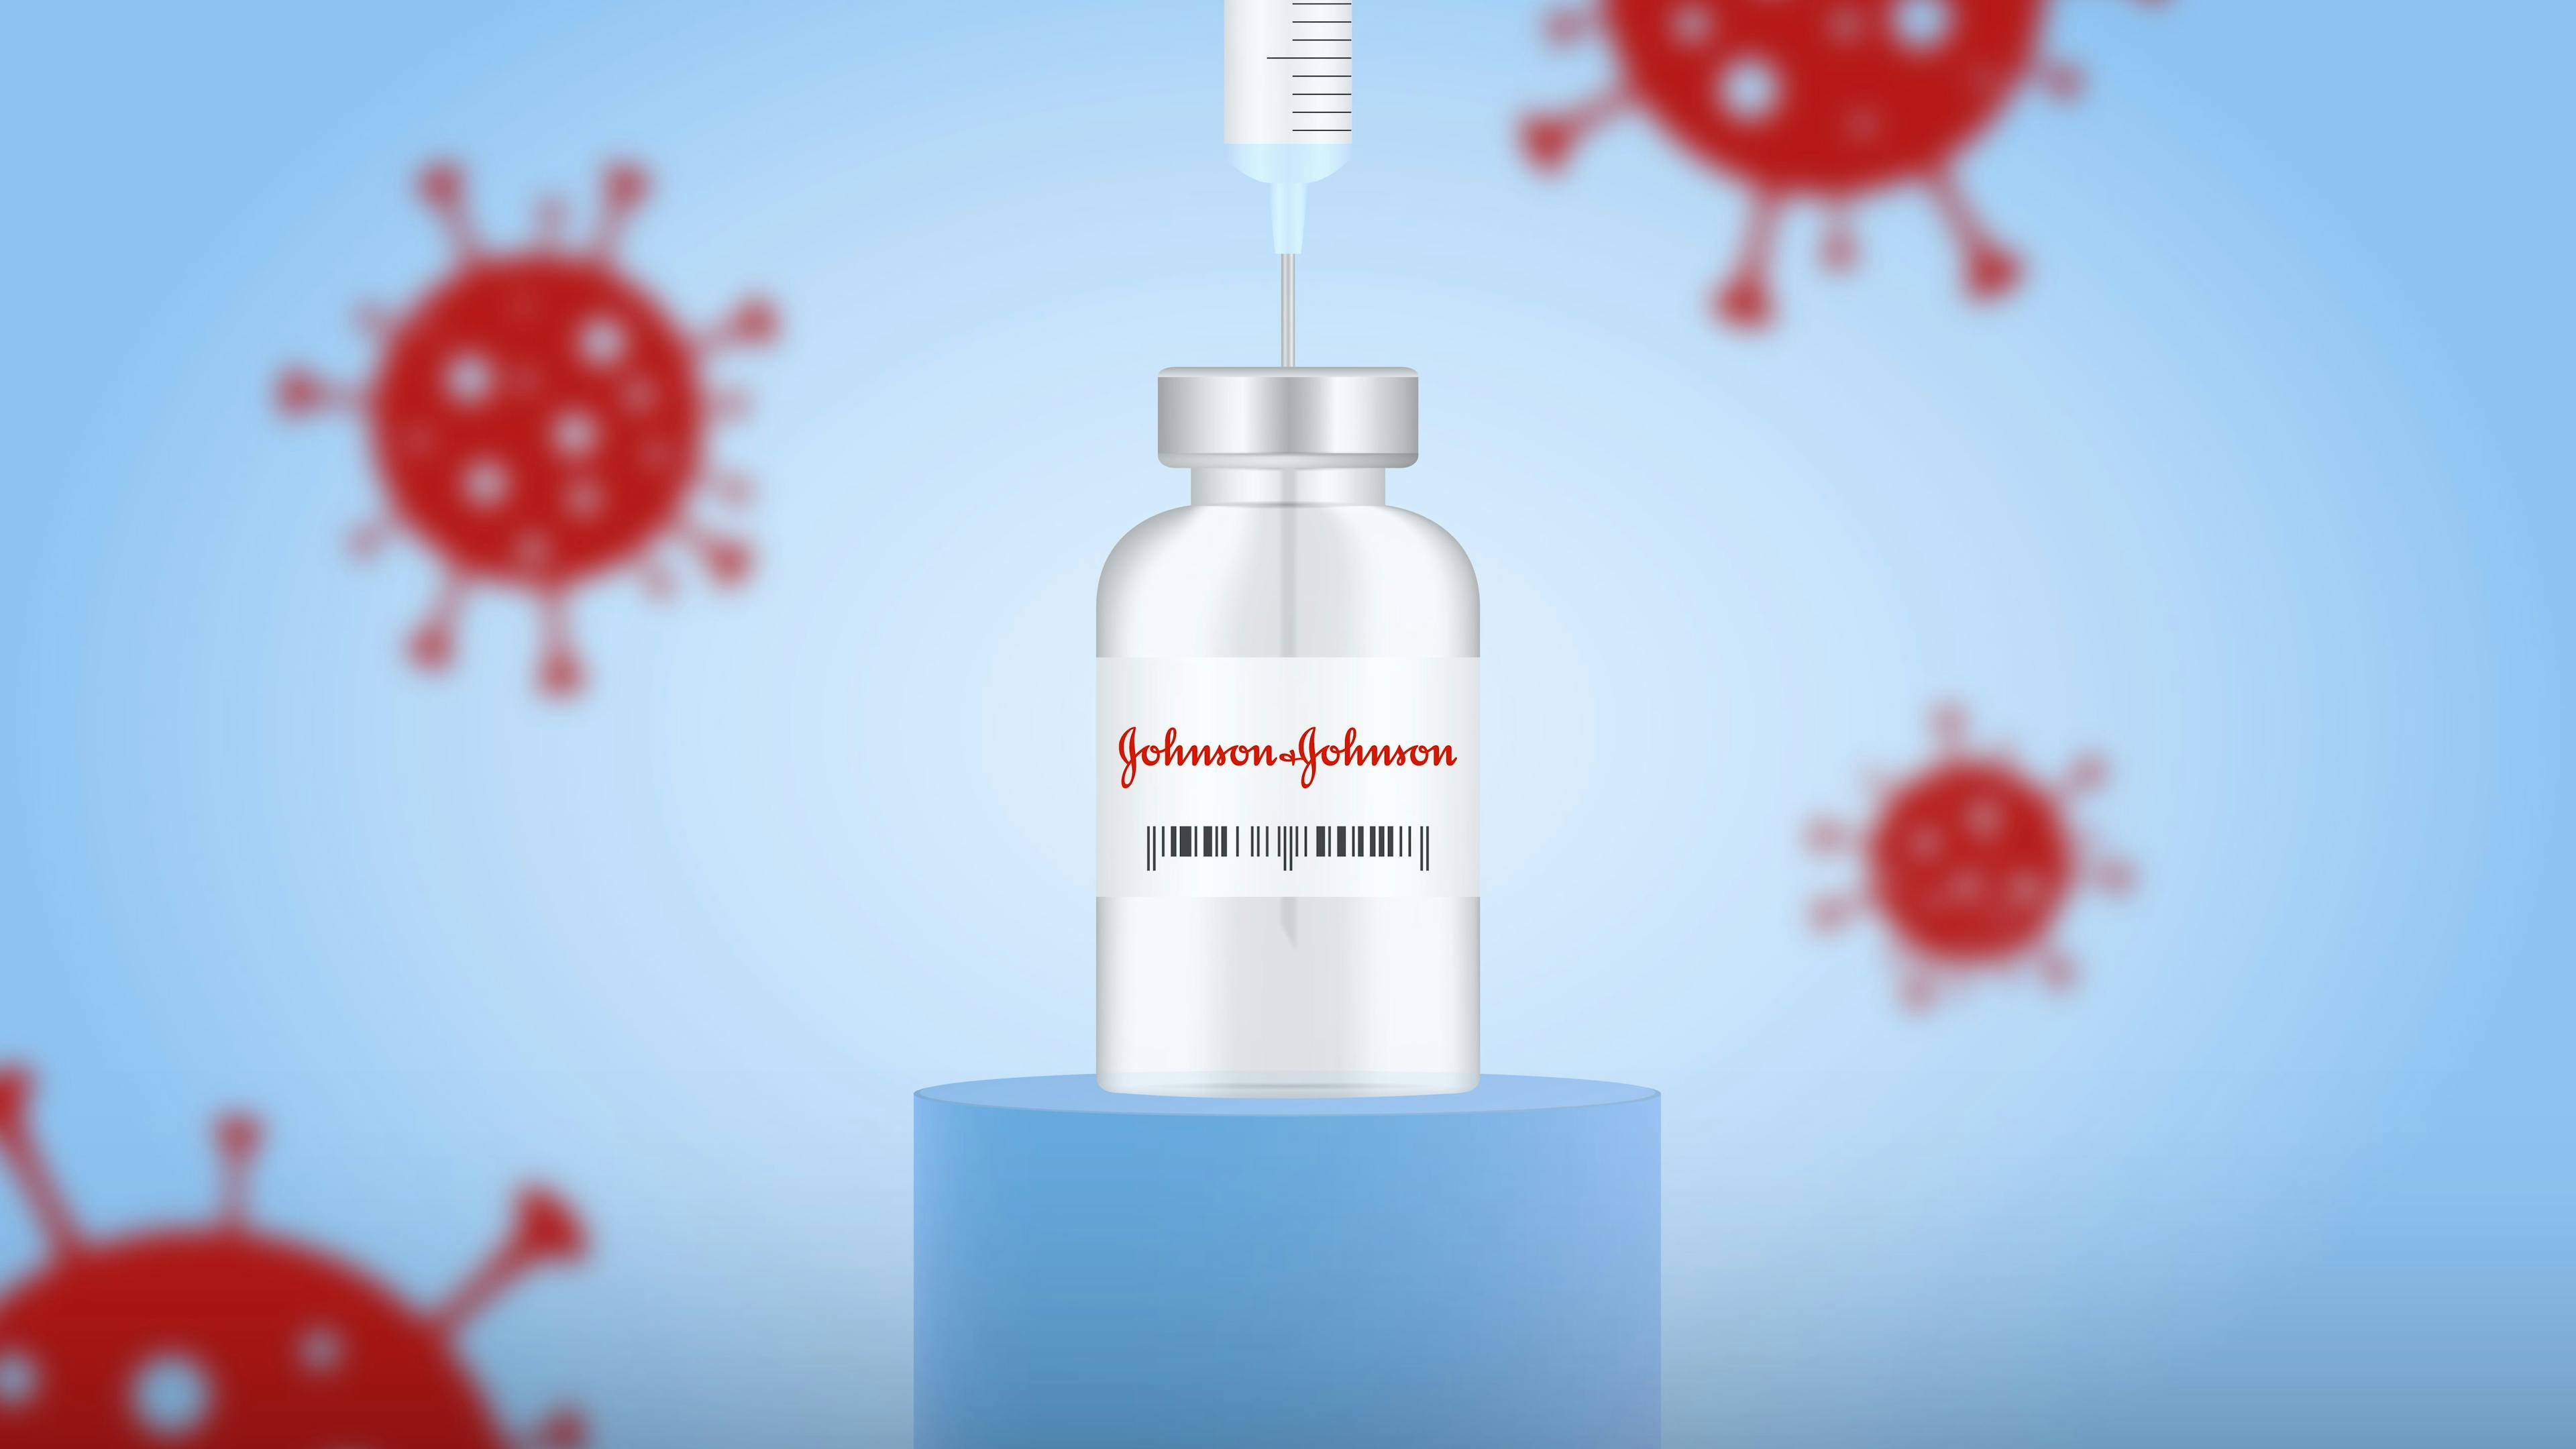 U.S. FDA and CDC recommend pausing use of J&J vaccine over blood clot concerns